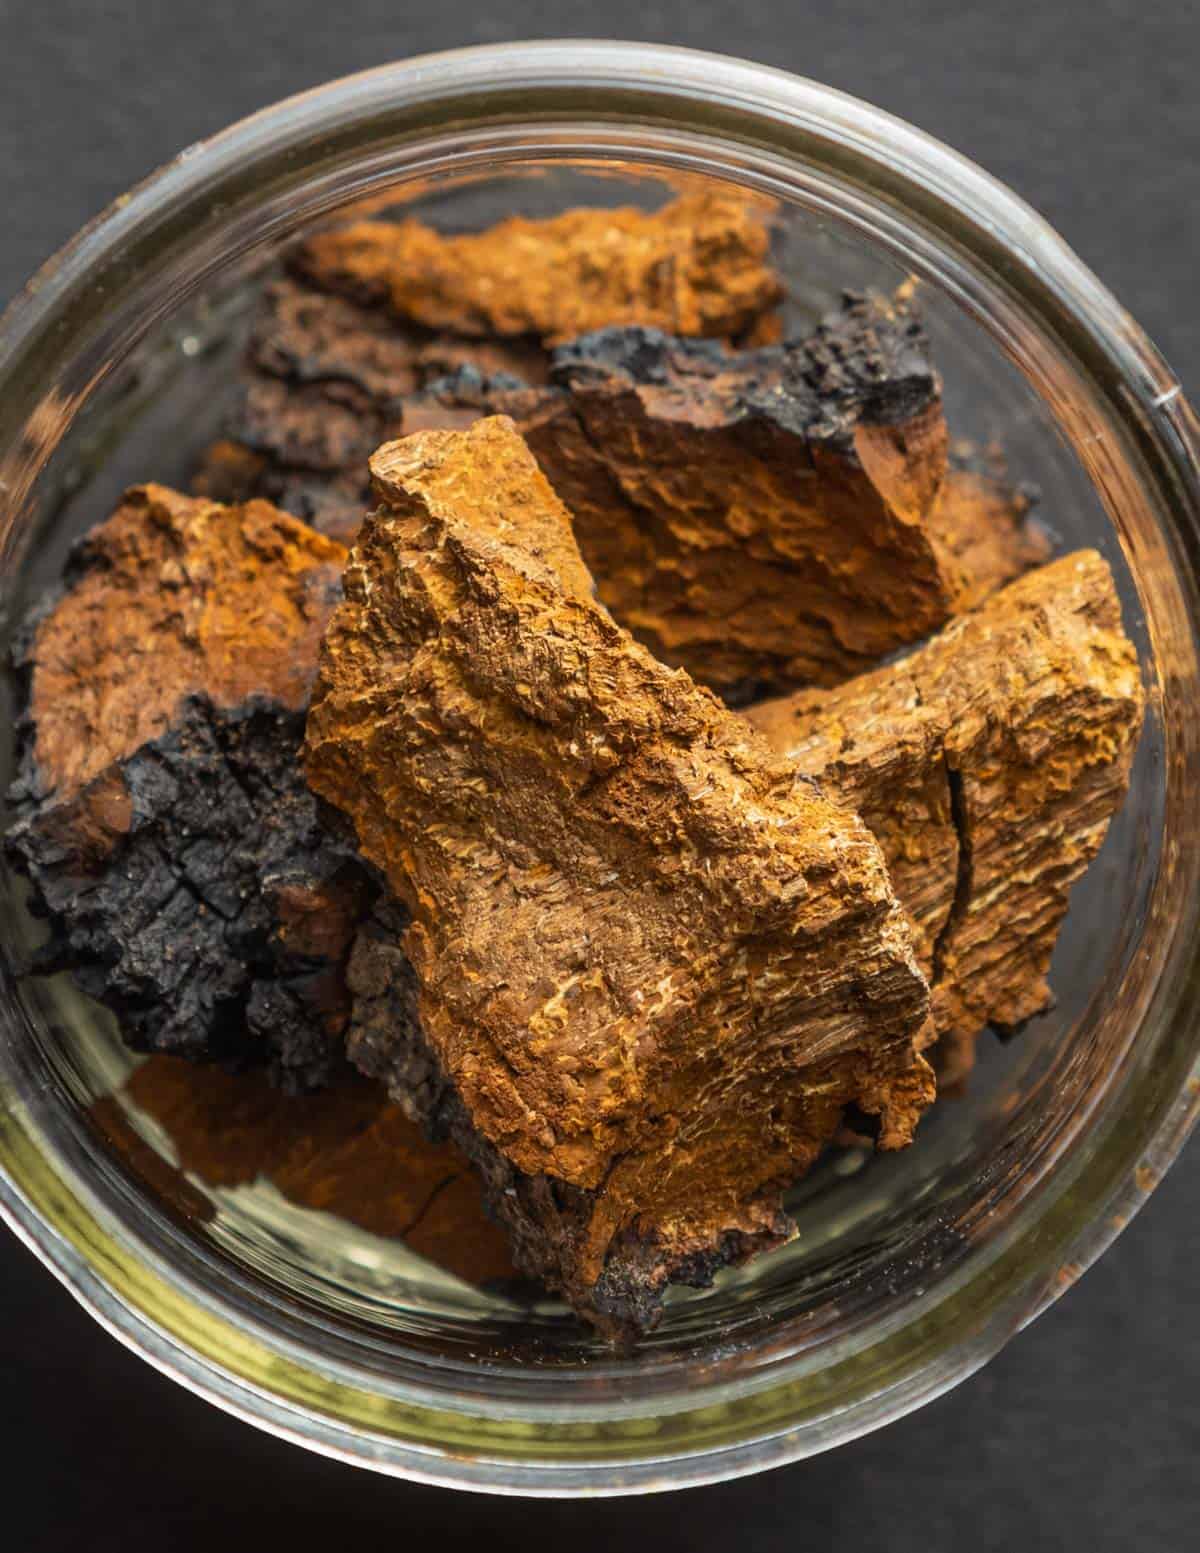 A glass jar filled with dried pieces of chaga chunks.